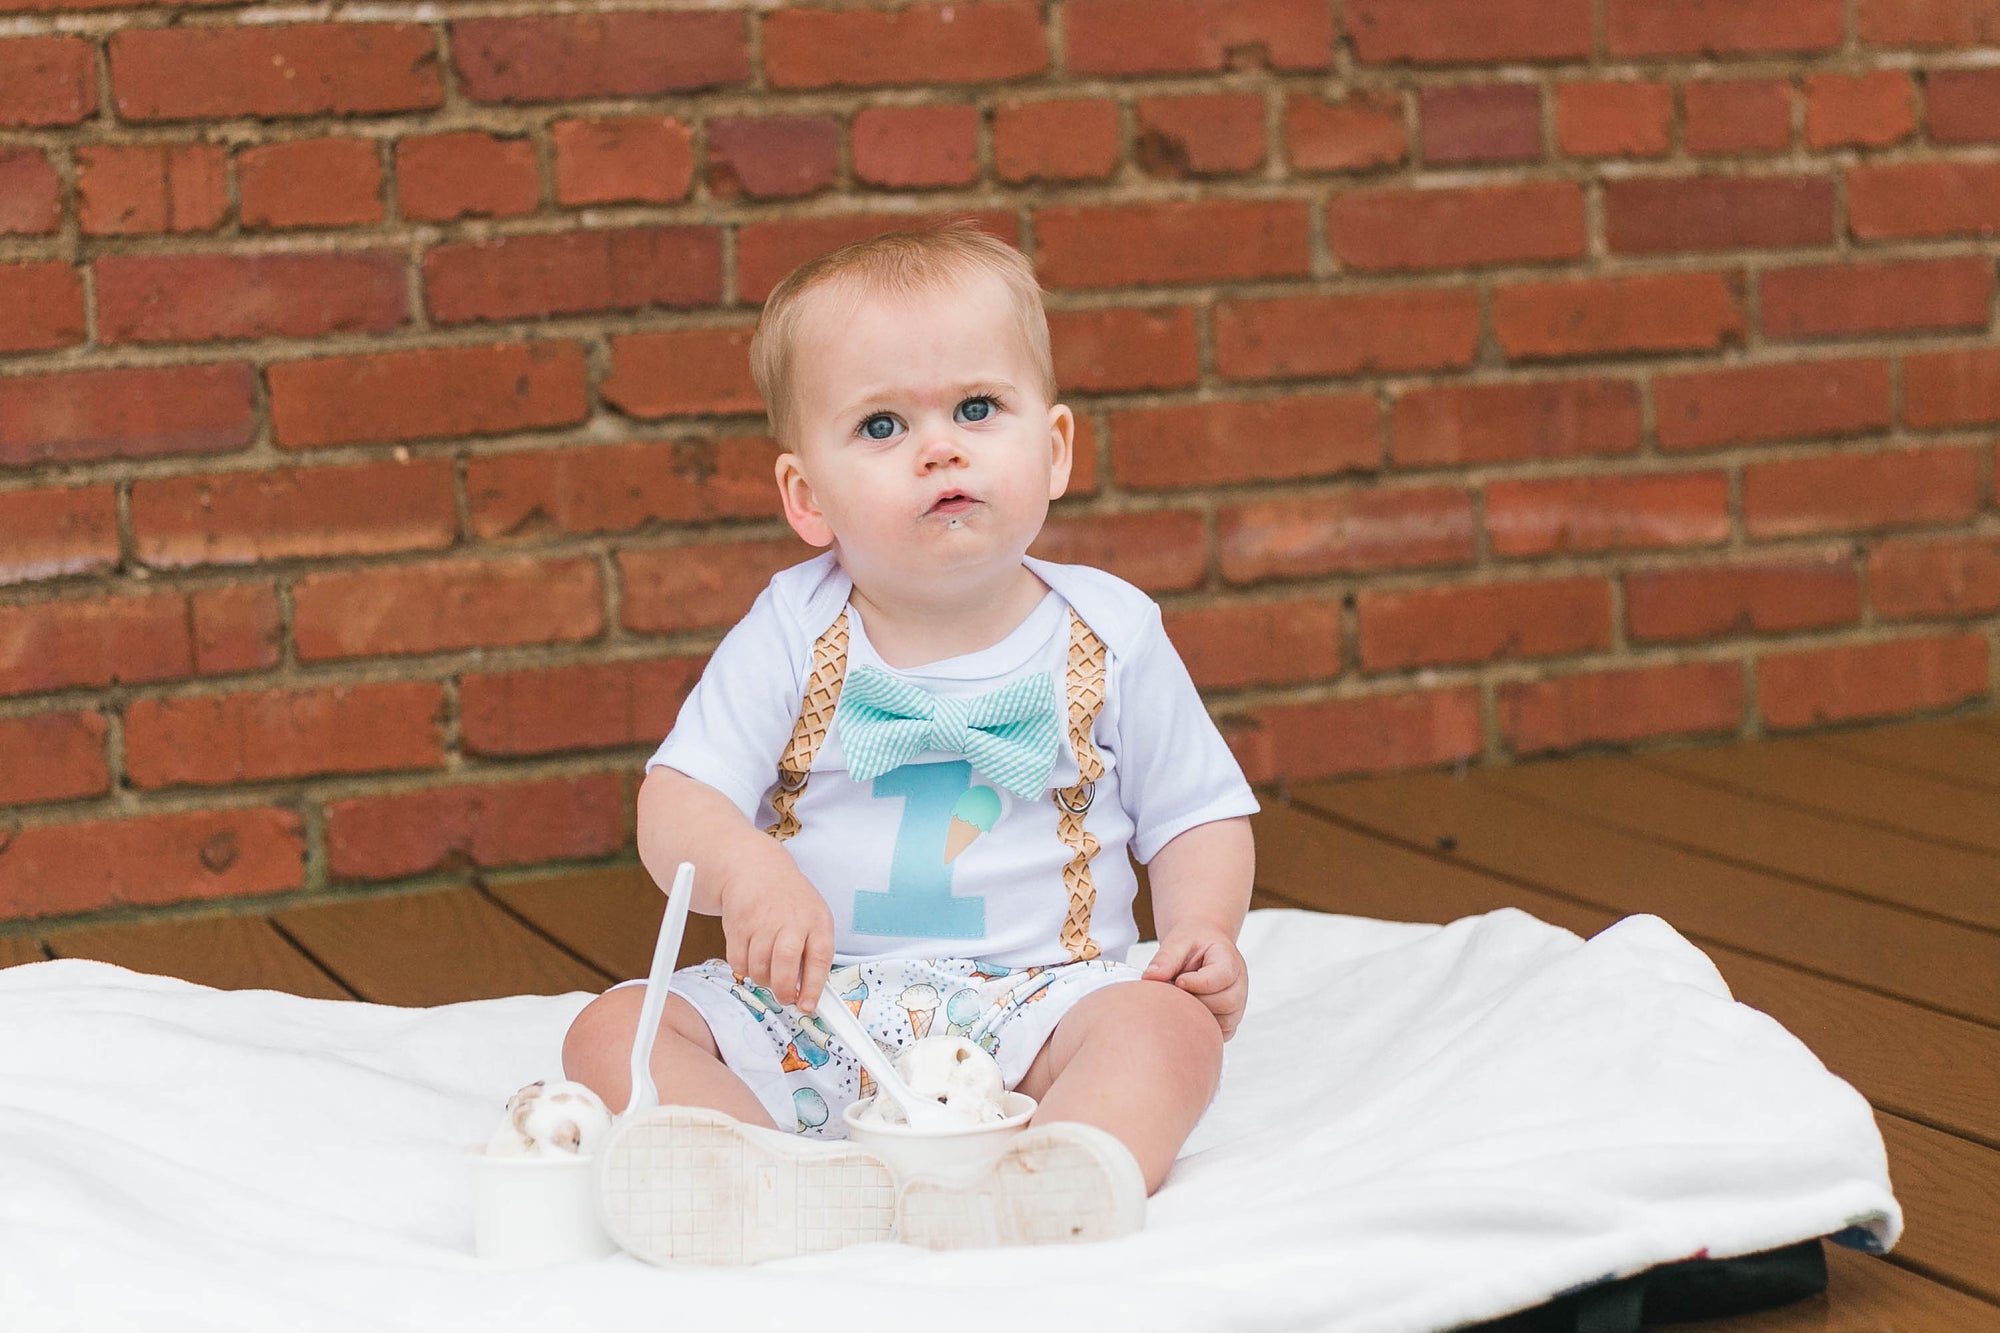 5 Tips for Choosing a Cake Smash Outfit to Match Baby Boy's 1st Birthday Theme